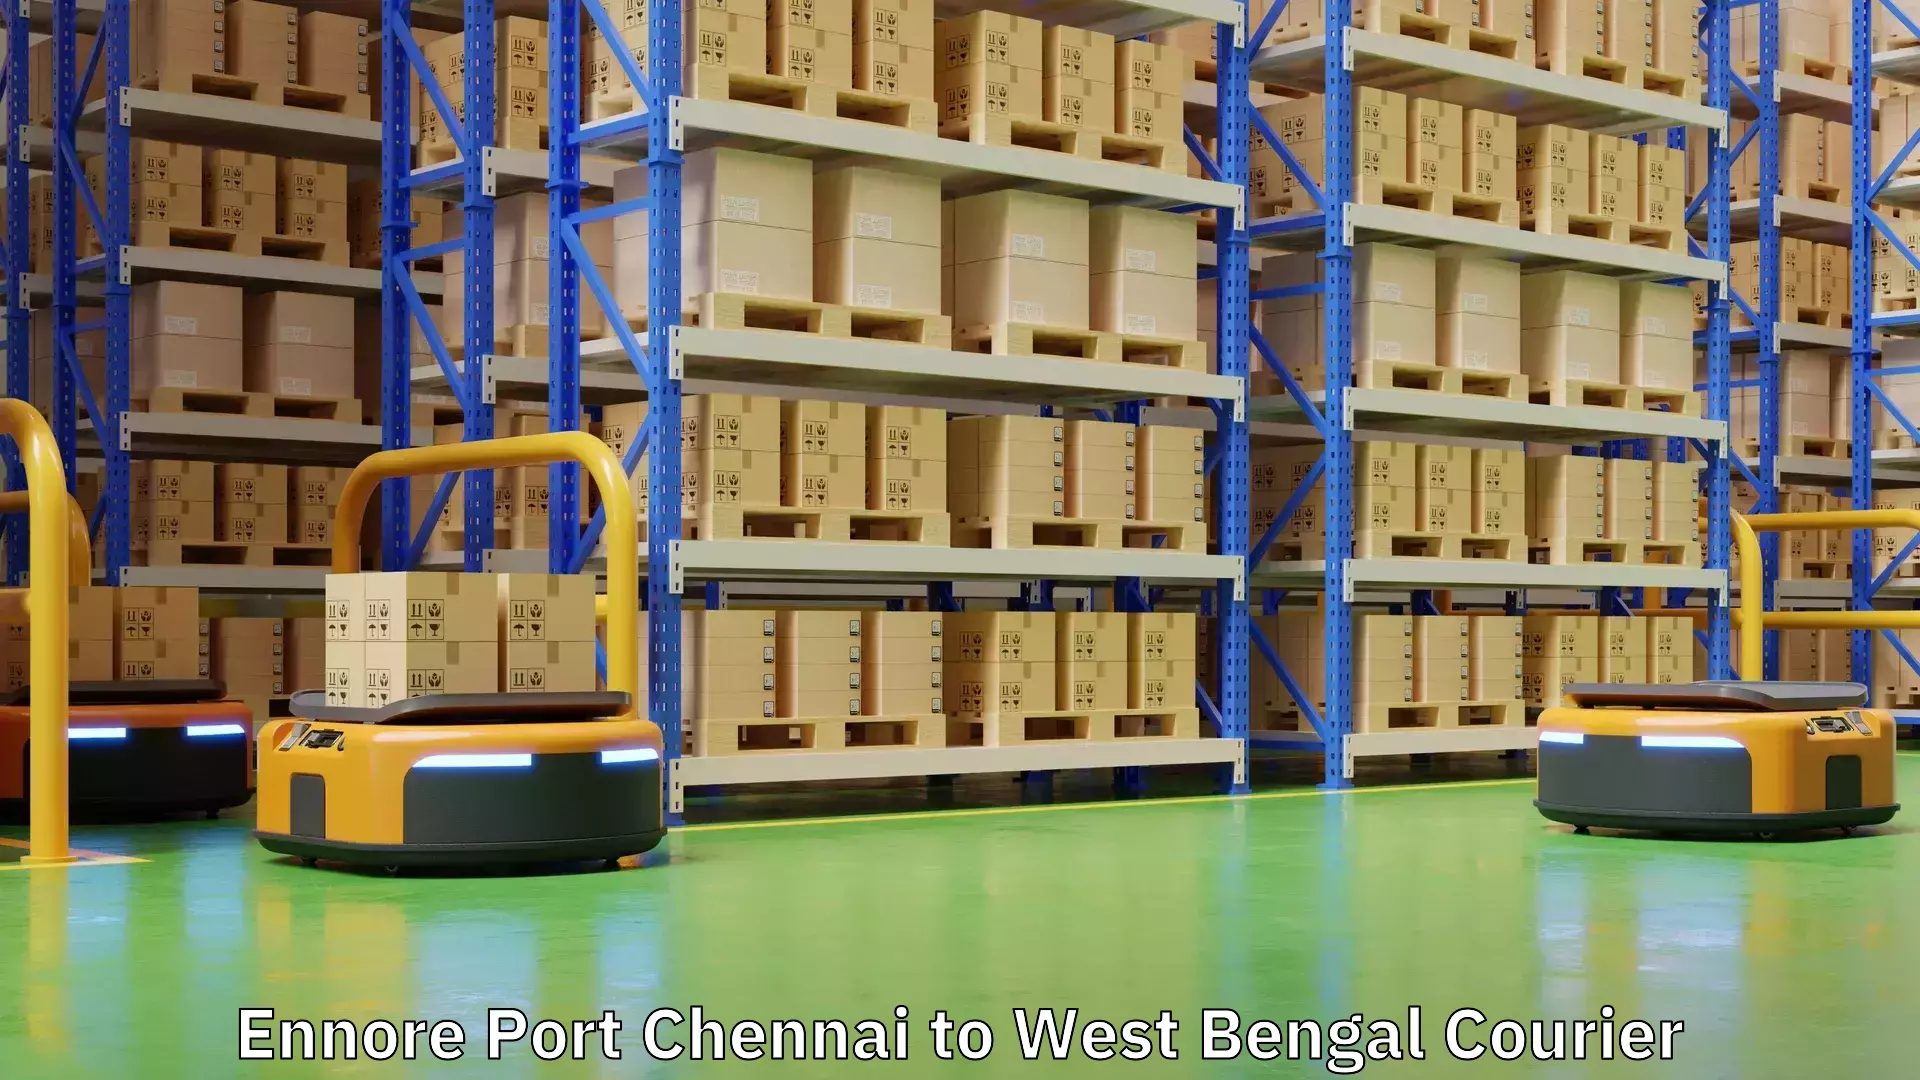 Logistics service provider in Ennore Port Chennai to West Bengal